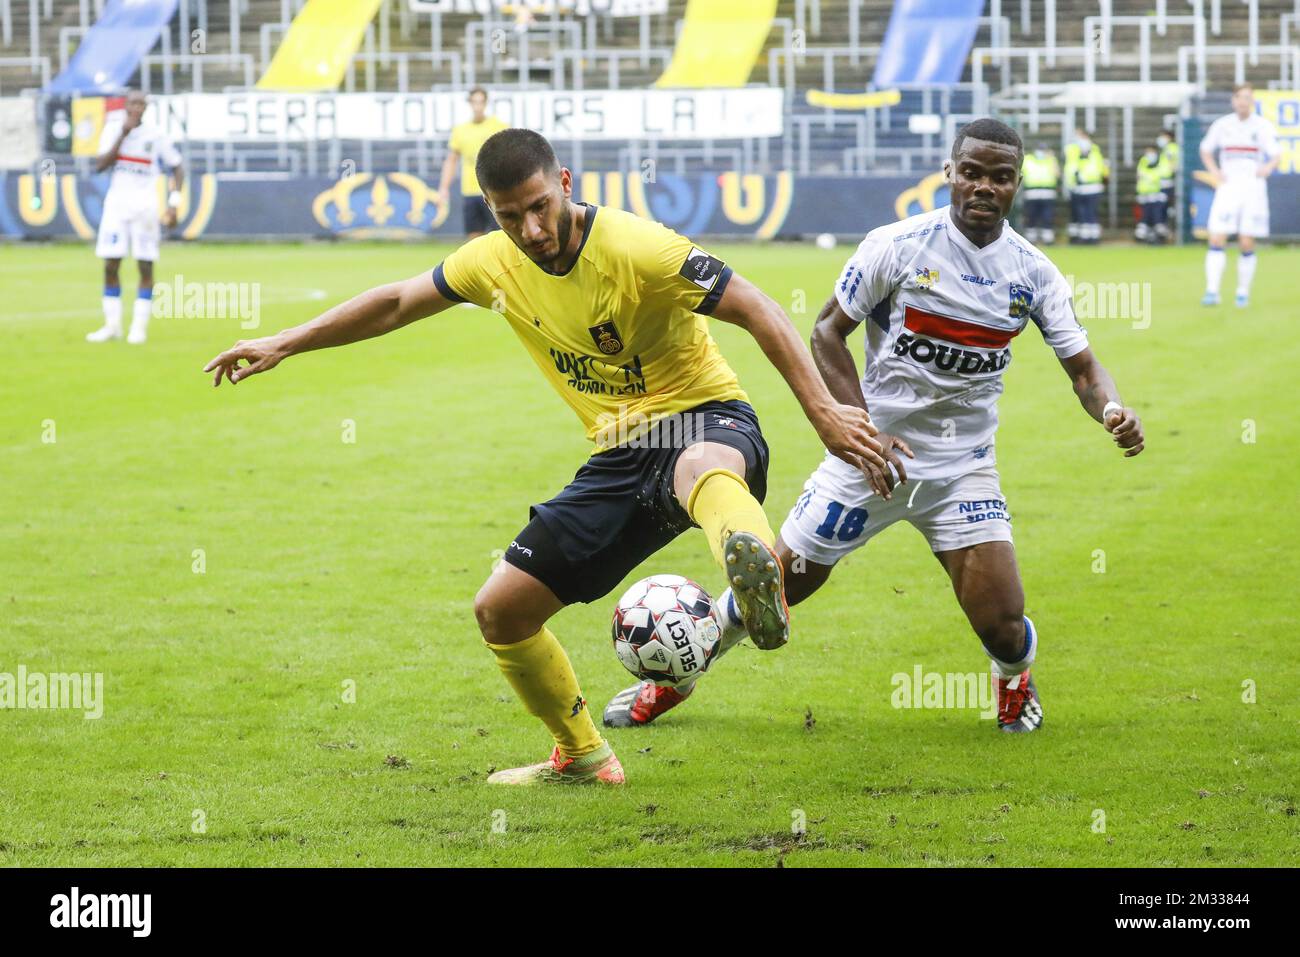 Union's Deniz Undav and Westerlo's Kouya Mabea fight for the ball during a soccer match between Union Saint-Gilloise and KVC Westerlo, Sunday 30 August 2020 in Brussels, on day 2 of the 'Proximus League' 1B second division of the Belgian soccer championship. BELGA PHOTO THIERRY ROGE Stock Photo